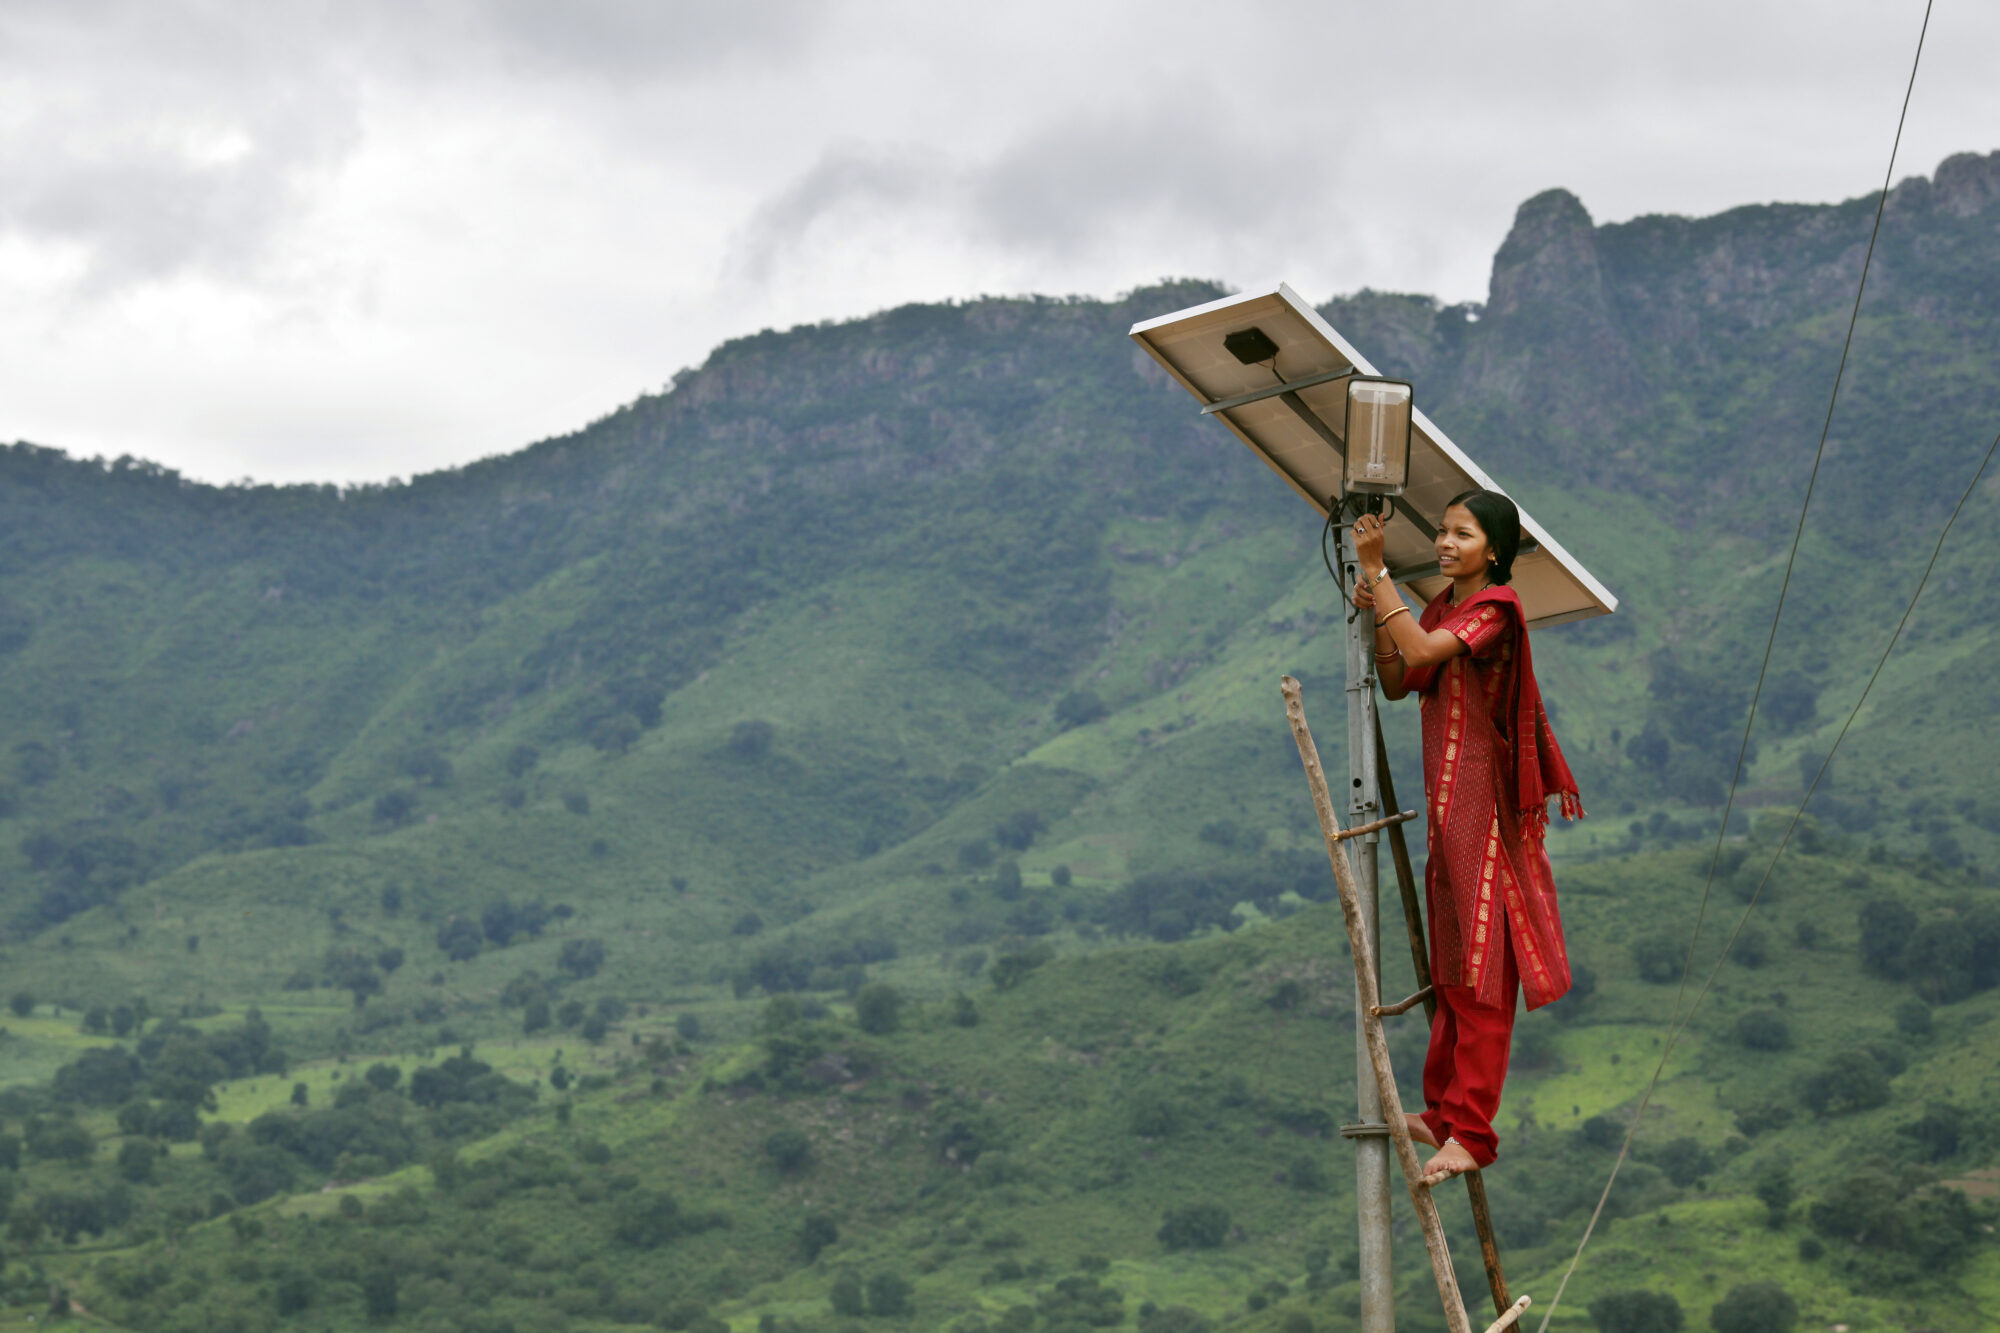 A person stands barefoot at the top of a tall ladder, making adjustments to the mounted solar panel. Rolling mountains seen behind them, giving a sense of the tall height they are working at.